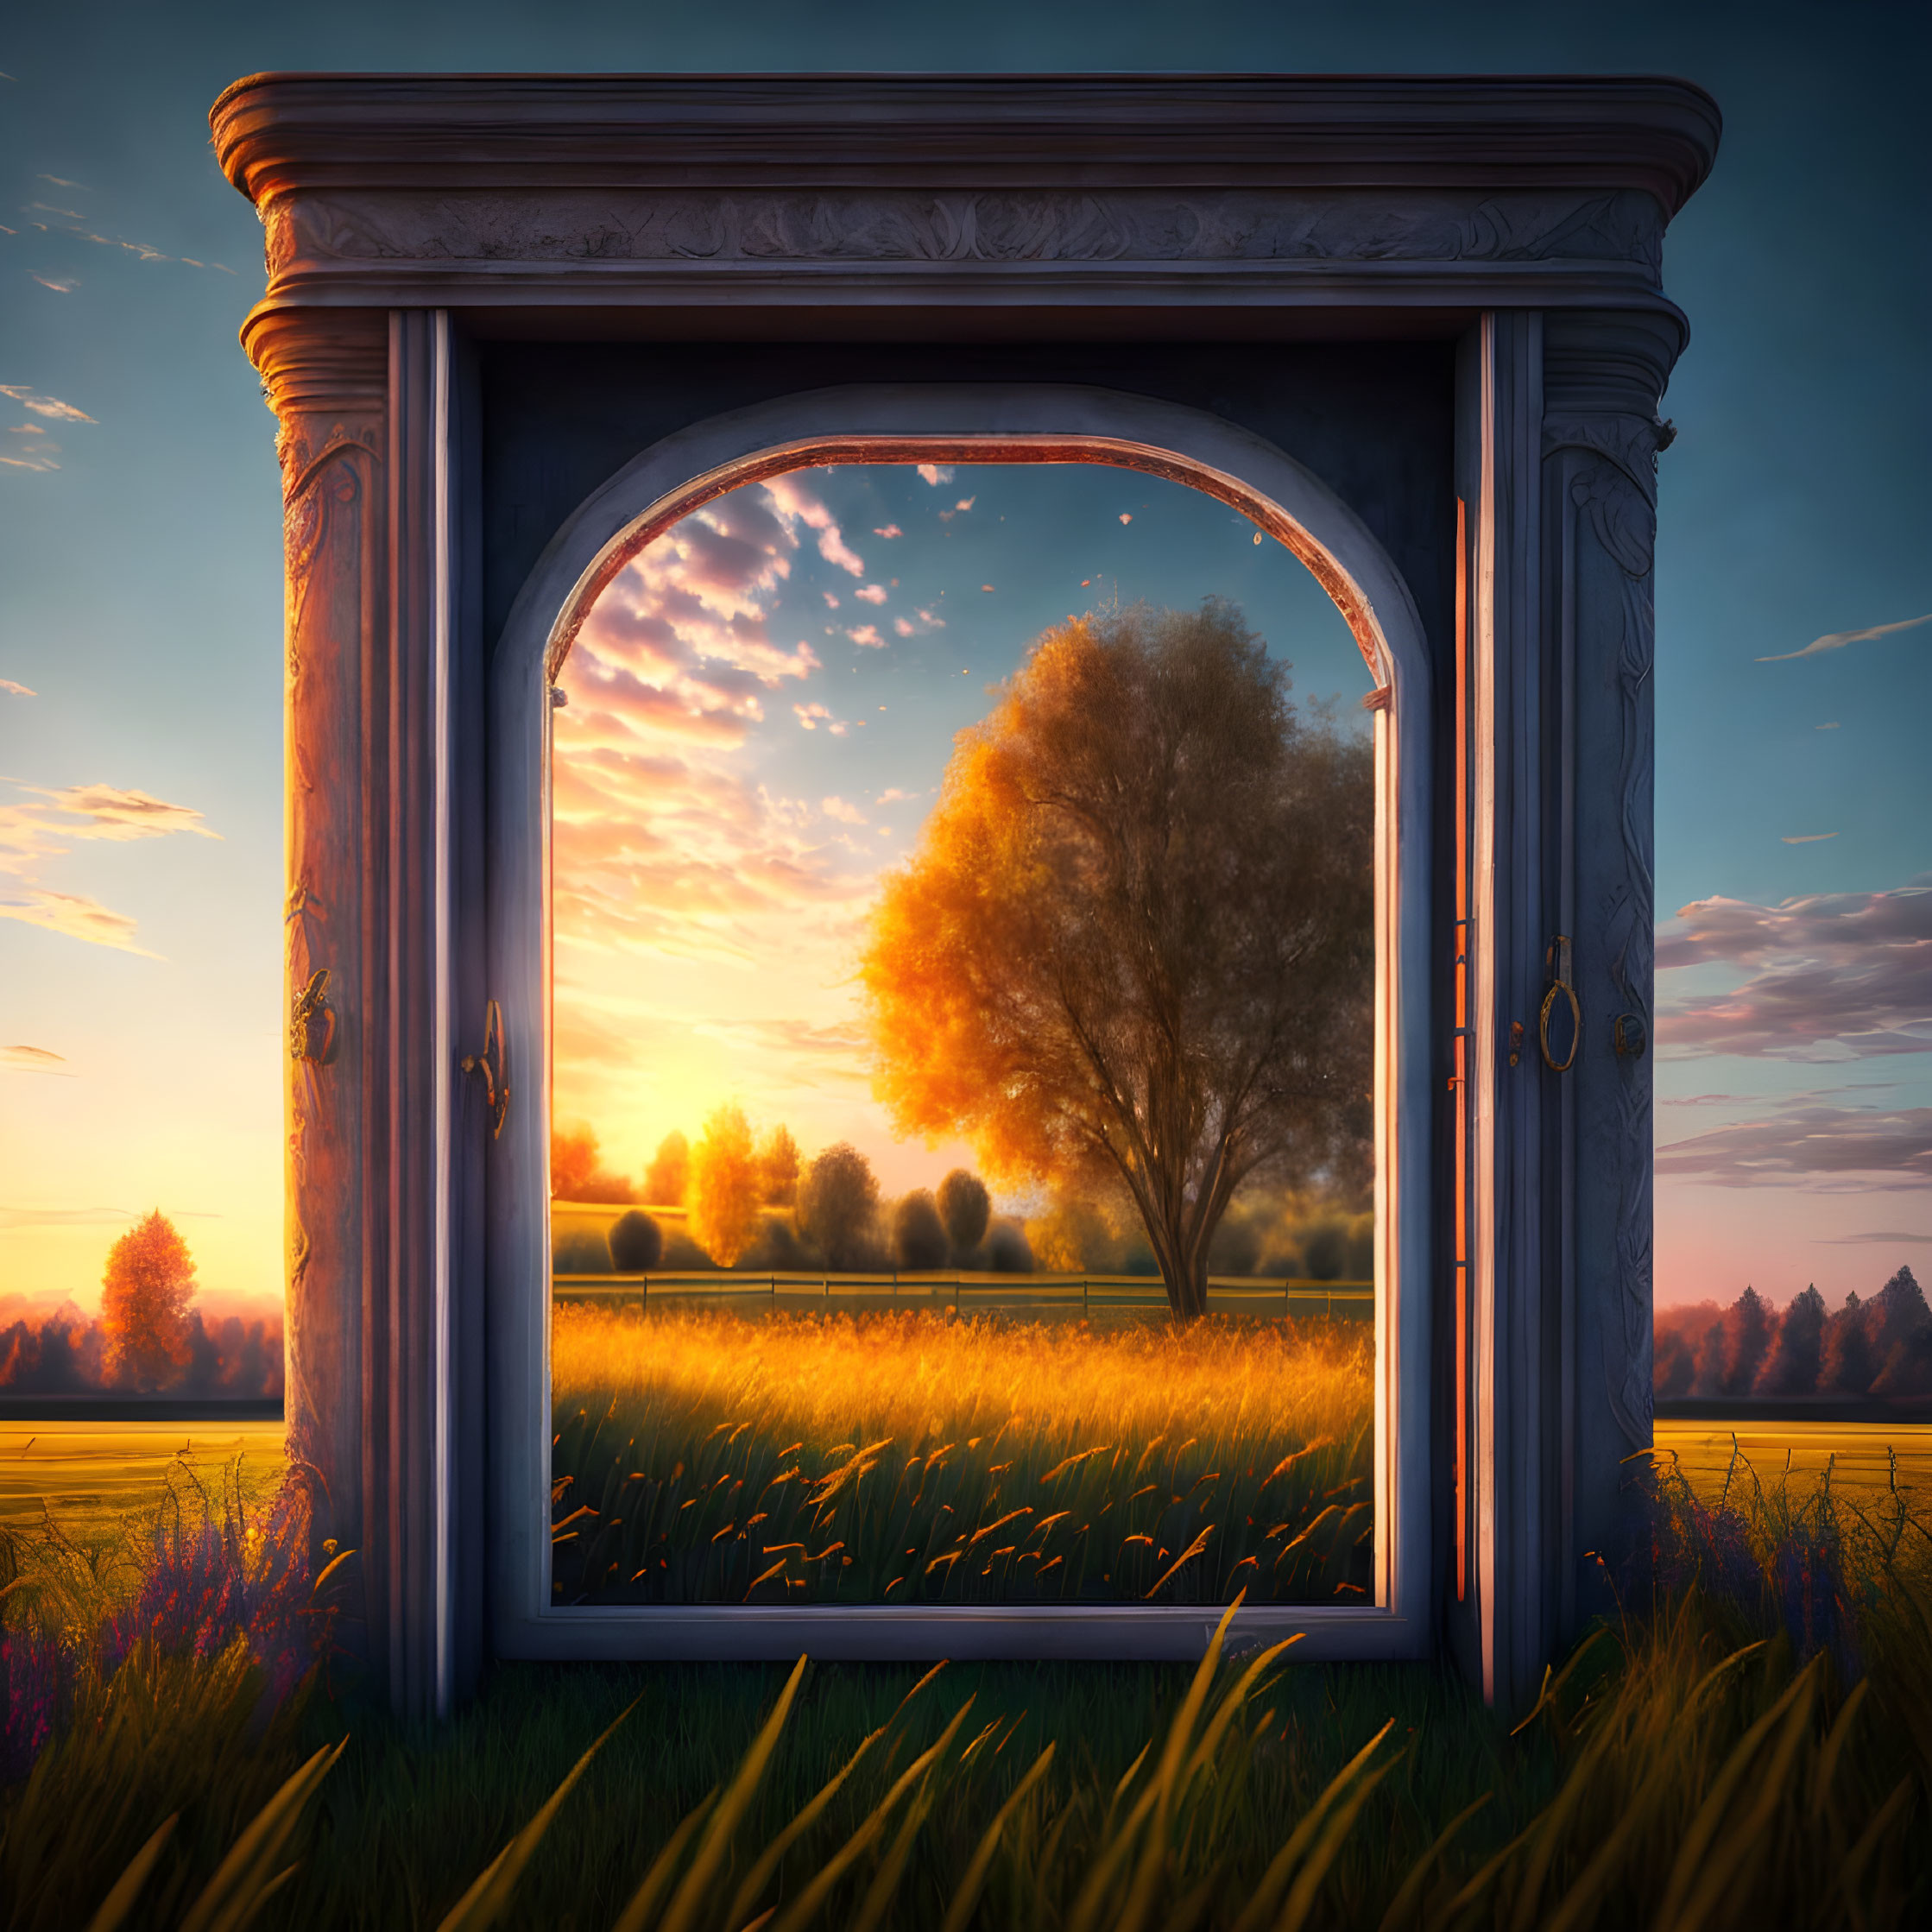 Ornate open window framing solitary tree at sunset